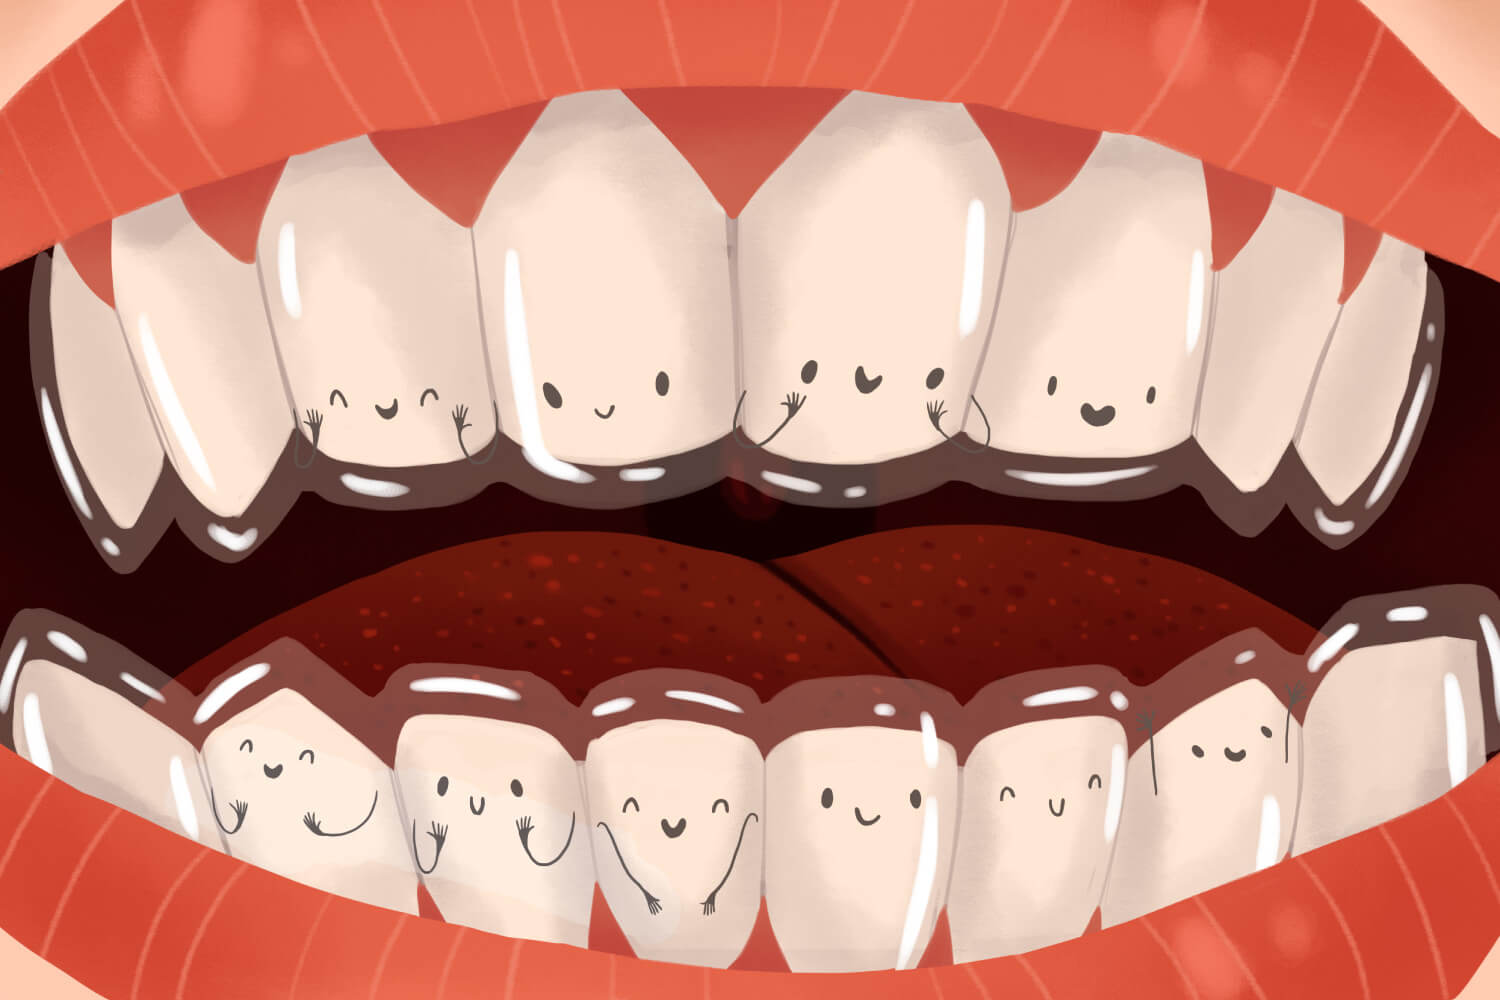 Cartoon image of smiling teeth with Invisalign clear aligners